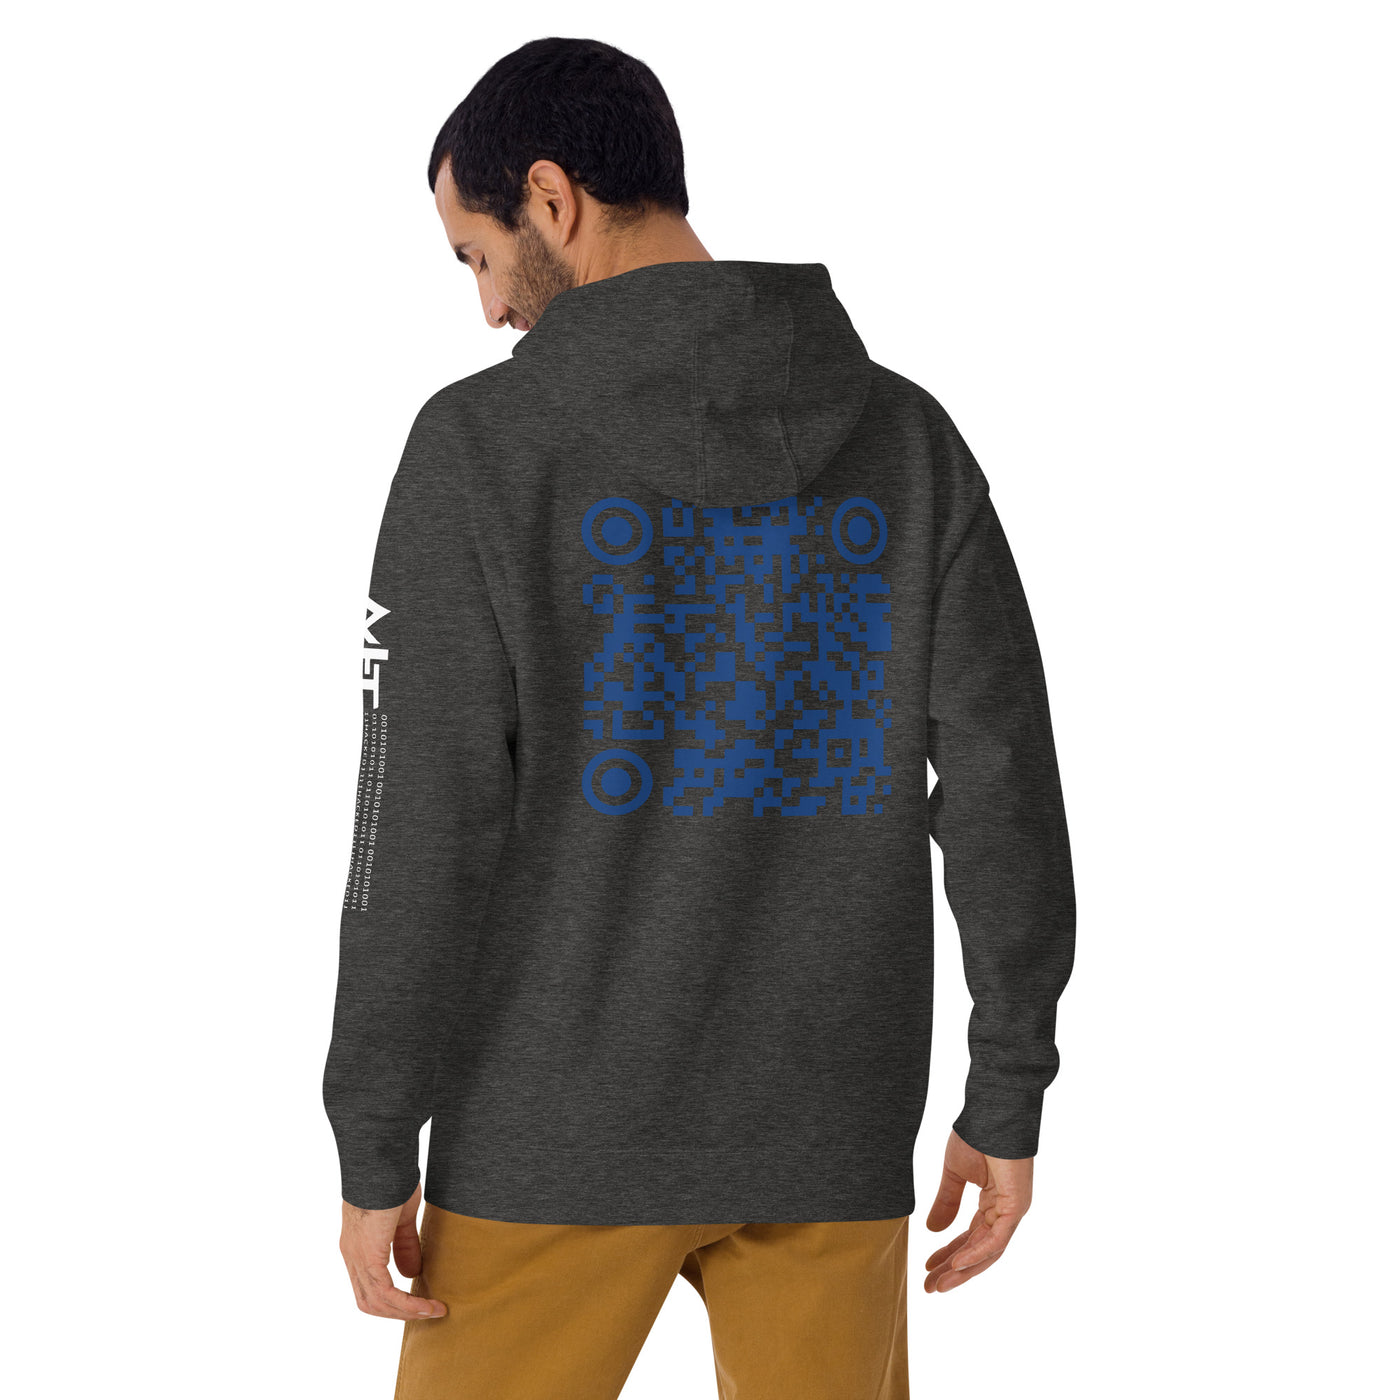 Who's the New Kid, Hacker, Developer, Gamer, Crypto King V1 - Unisex Hoodie Personalized QR Code